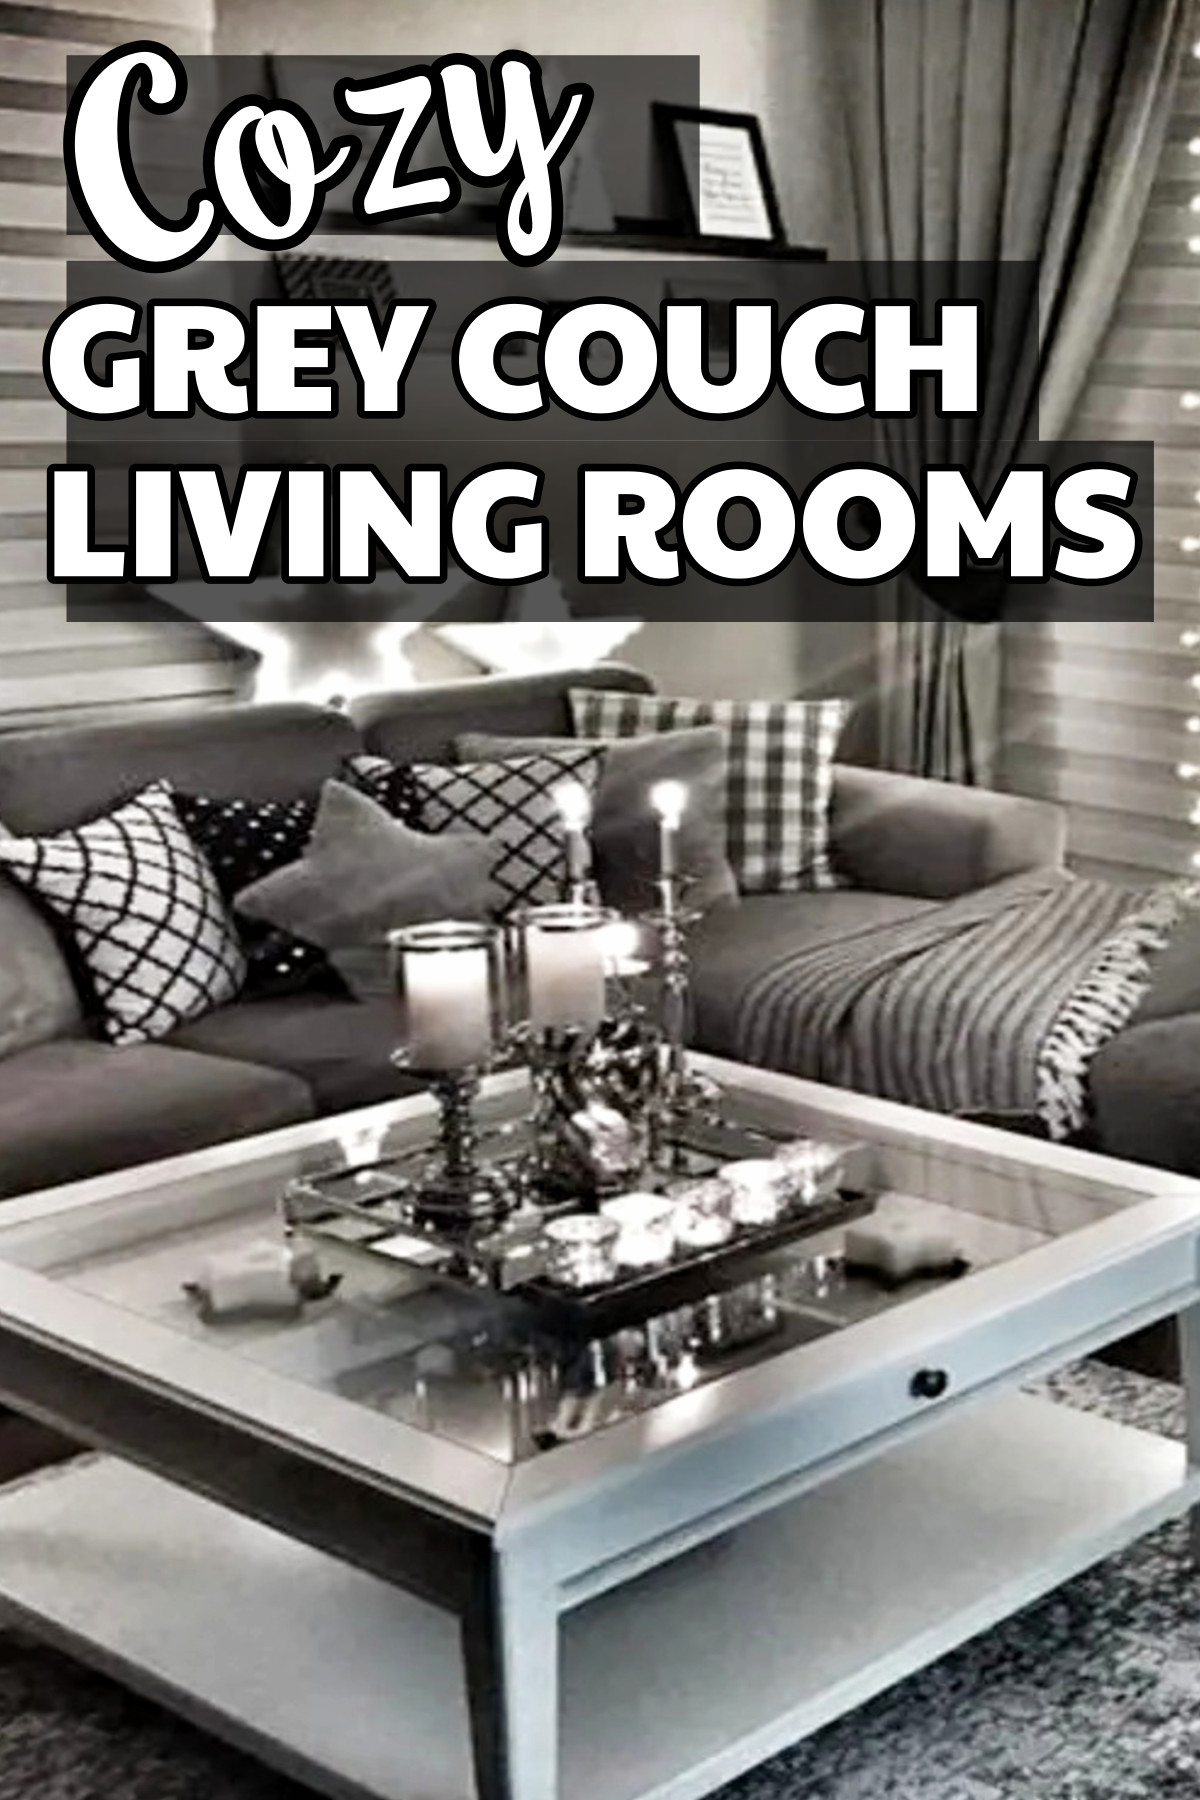 Grey Couch Living Rooms